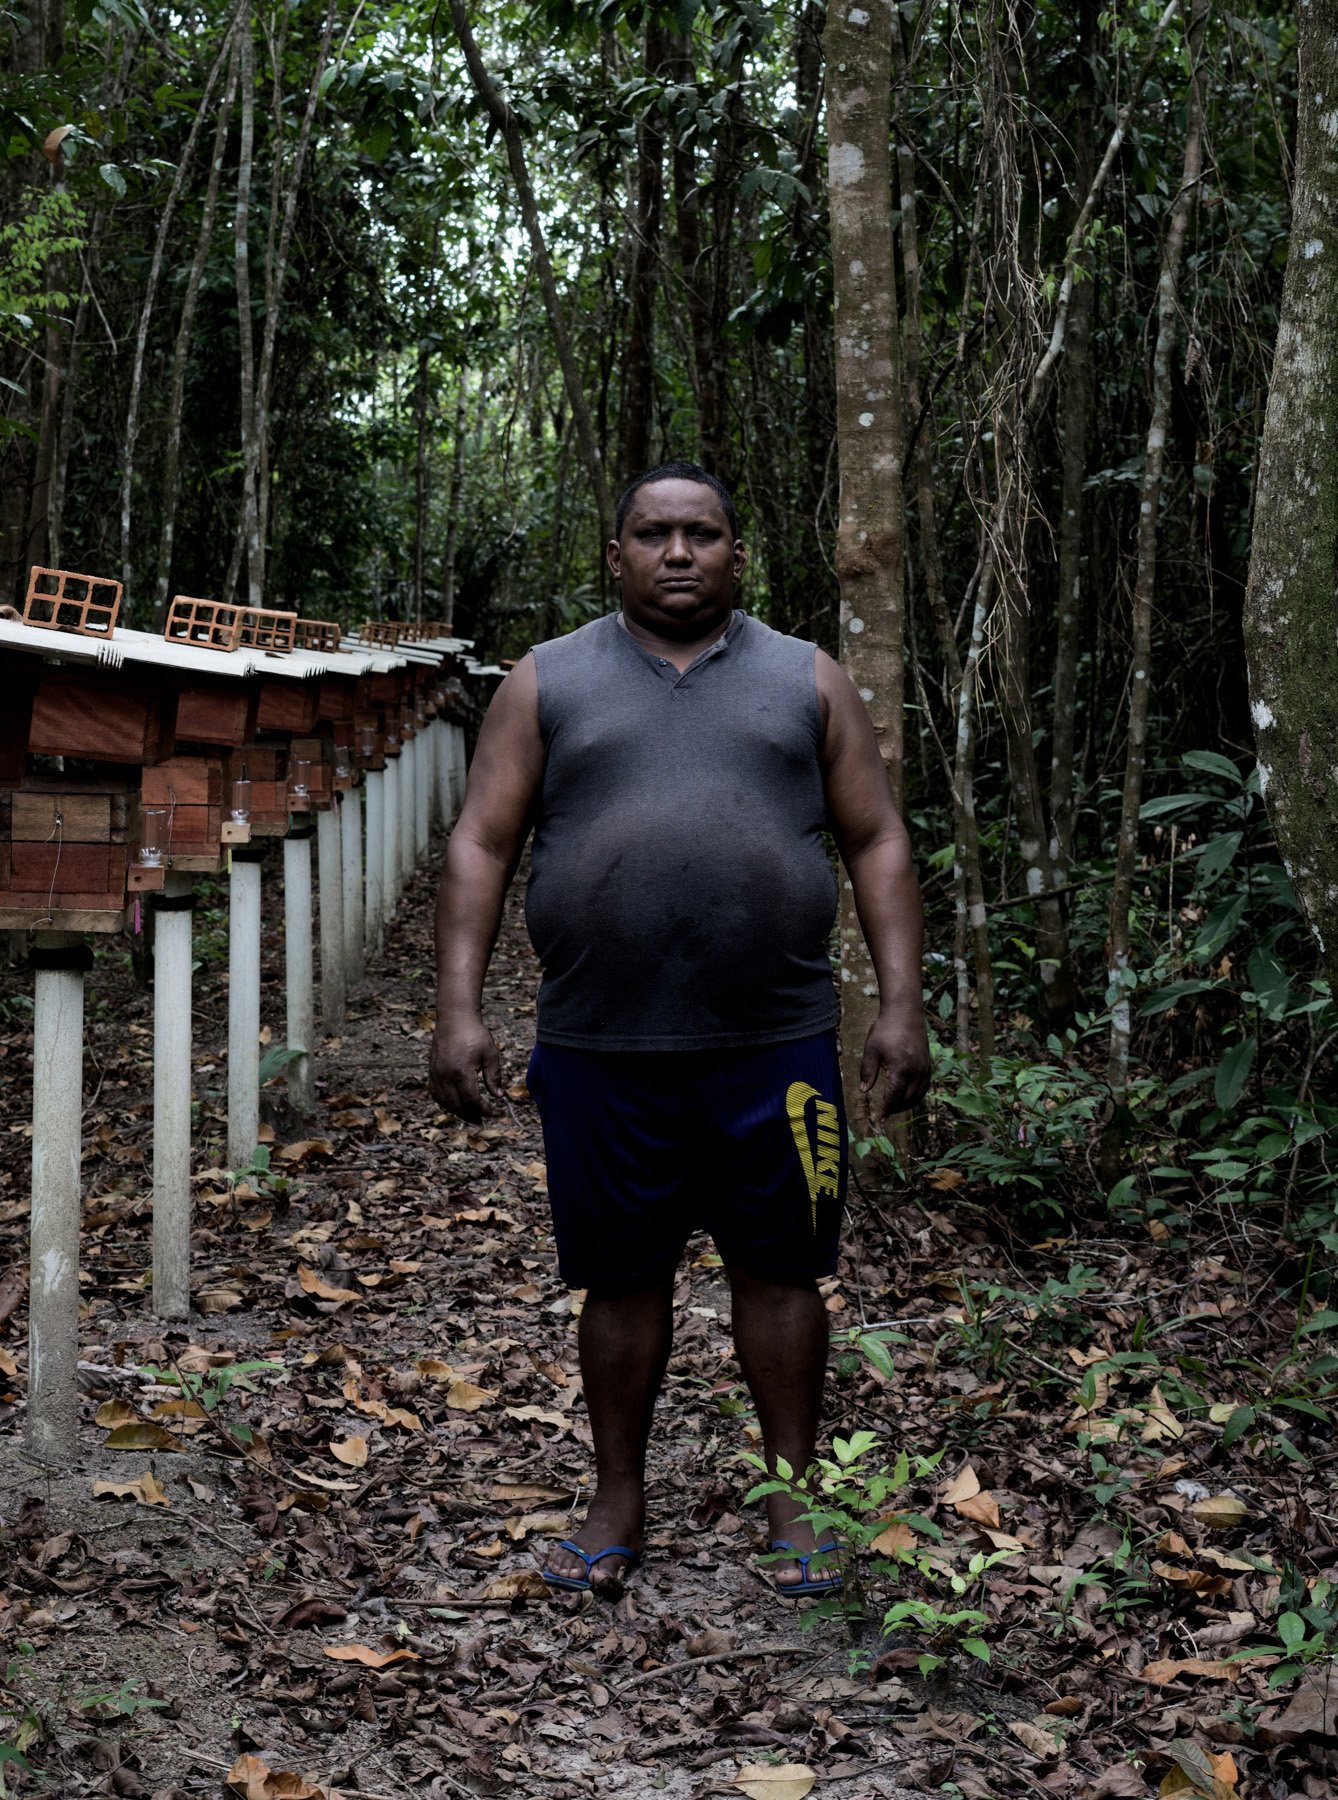  Boa Vista Da Acará, 2023. A portrait of a meliponiculturist of the community of Boa Vista do Acará. The members of the Community are small farmers with lower income, the honey production is a side income respect the main activities. The stingless be